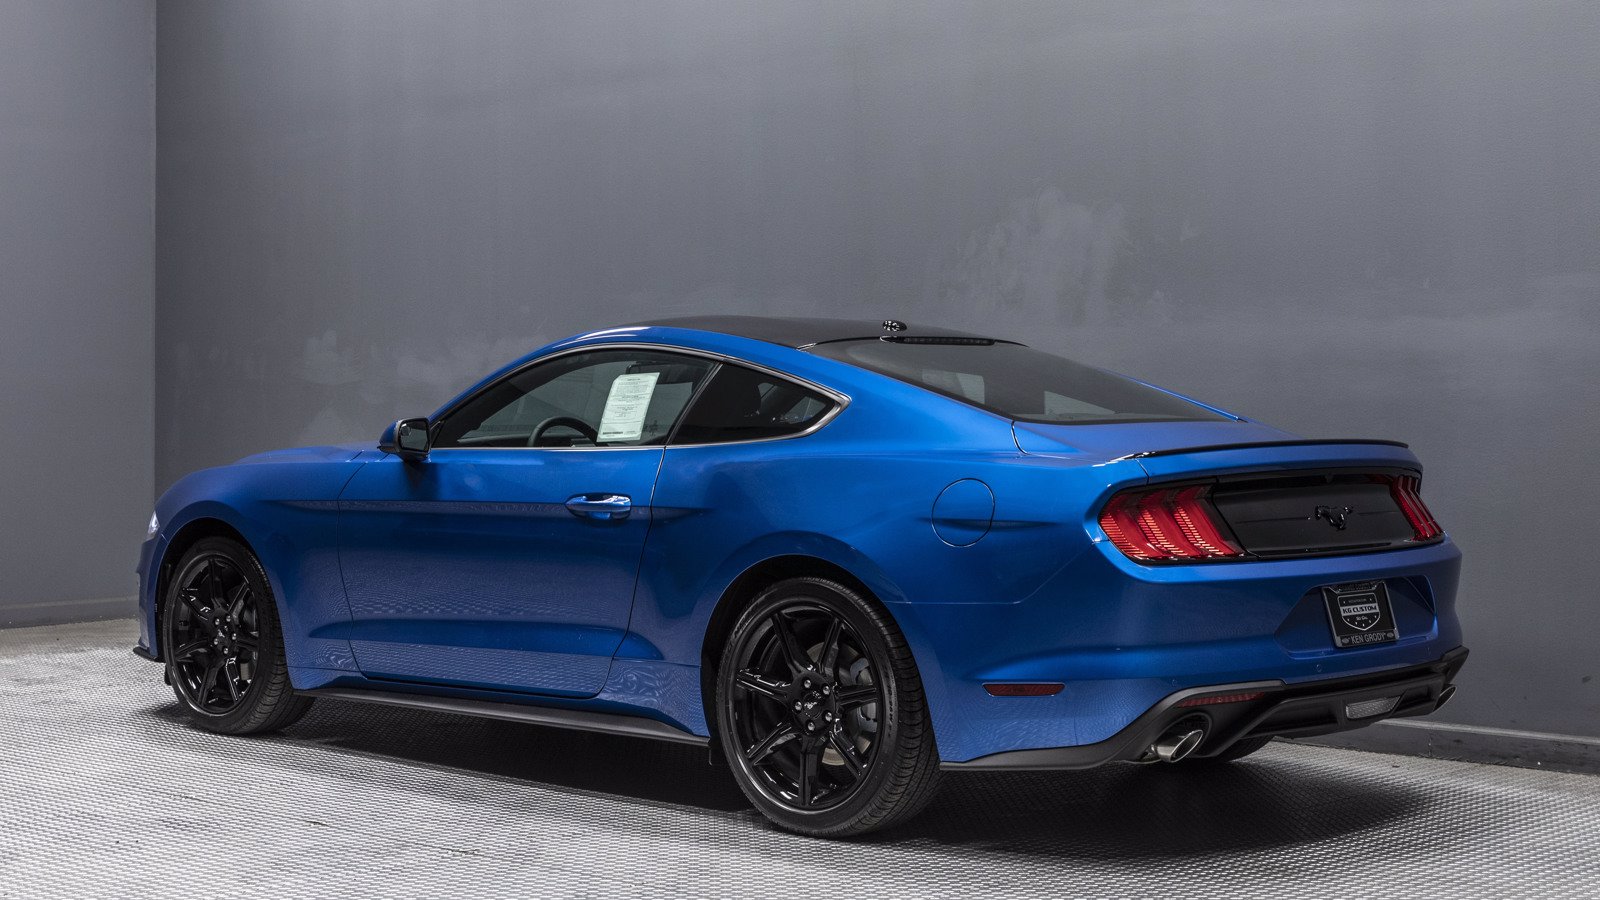 New 2020 Ford Mustang EcoBoost 2dr Car in Buena Park #03811 | Ken Grody ...